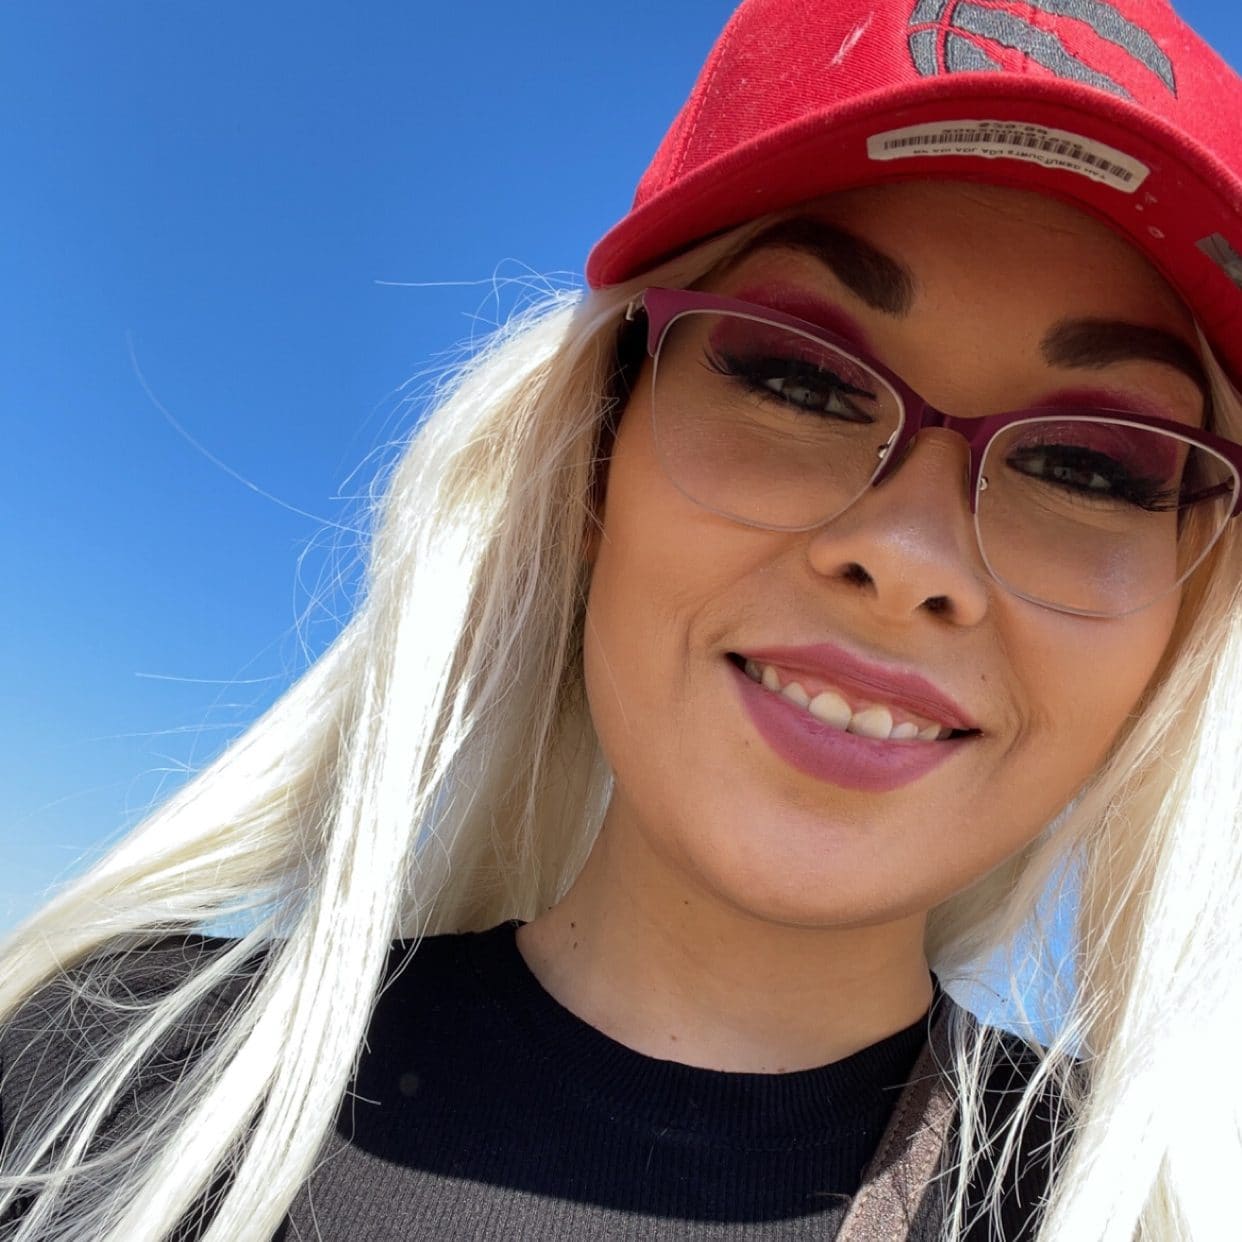 A young woman with long blonde hair wearing a red hat and glasses smiles at the camera